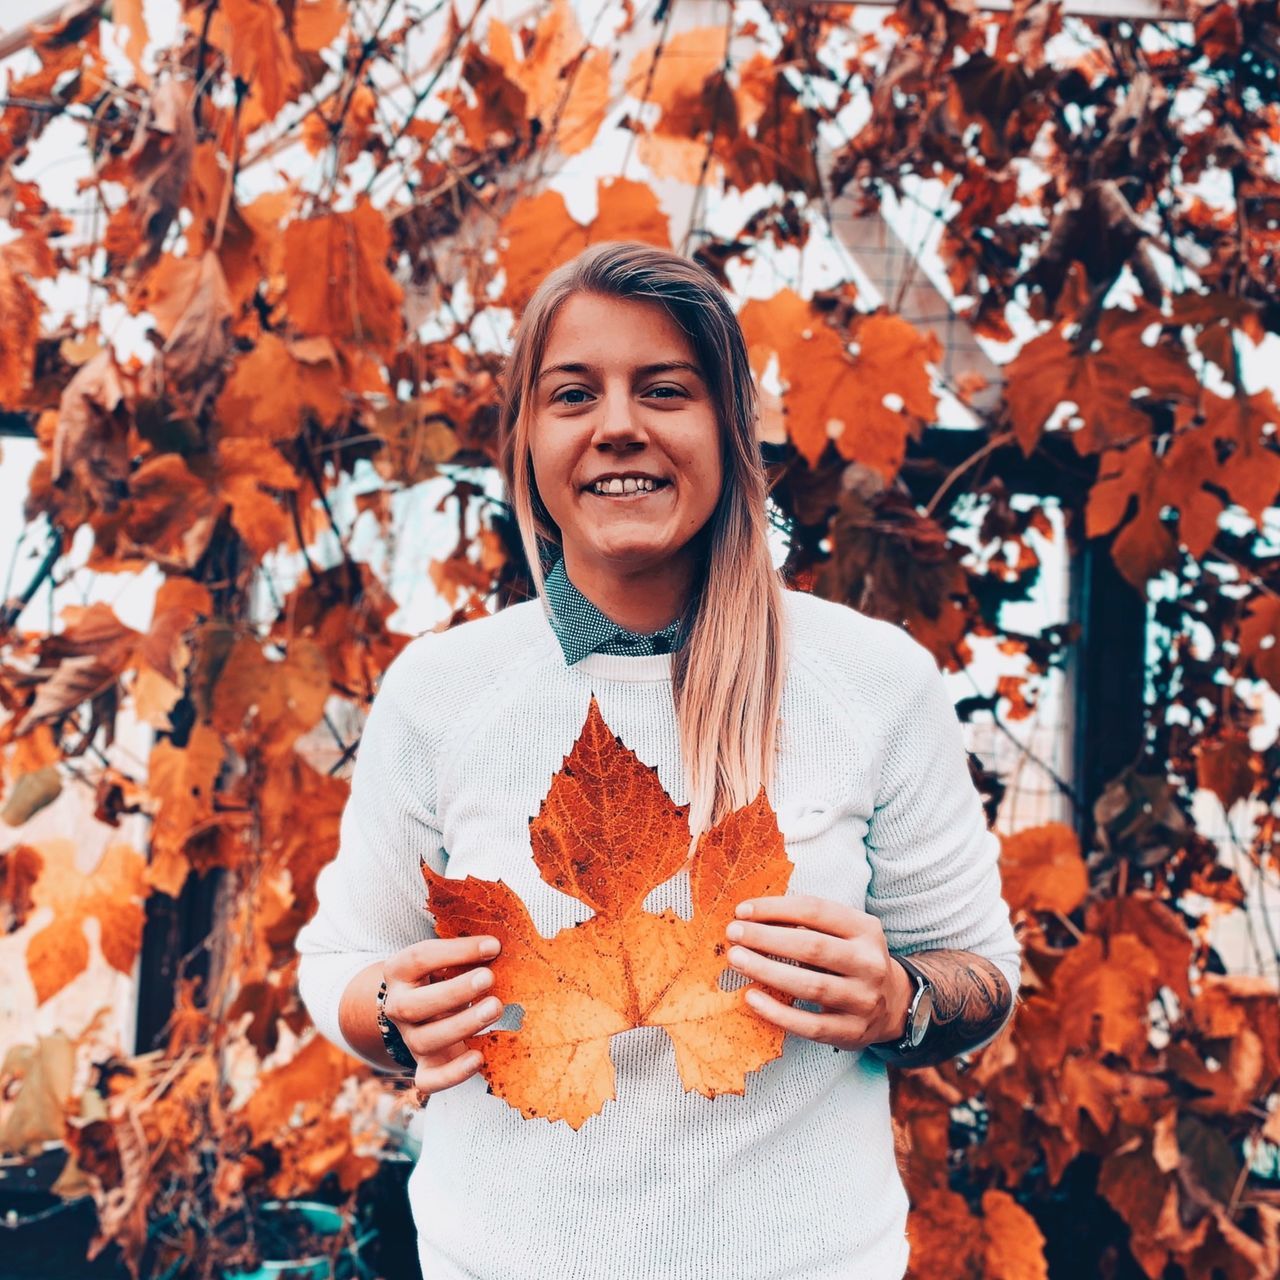 smiling, autumn, one person, front view, change, orange color, portrait, happiness, looking at camera, leaf, leisure activity, plant part, young adult, nature, lifestyles, day, real people, emotion, holding, leaves, maple leaf, outdoors